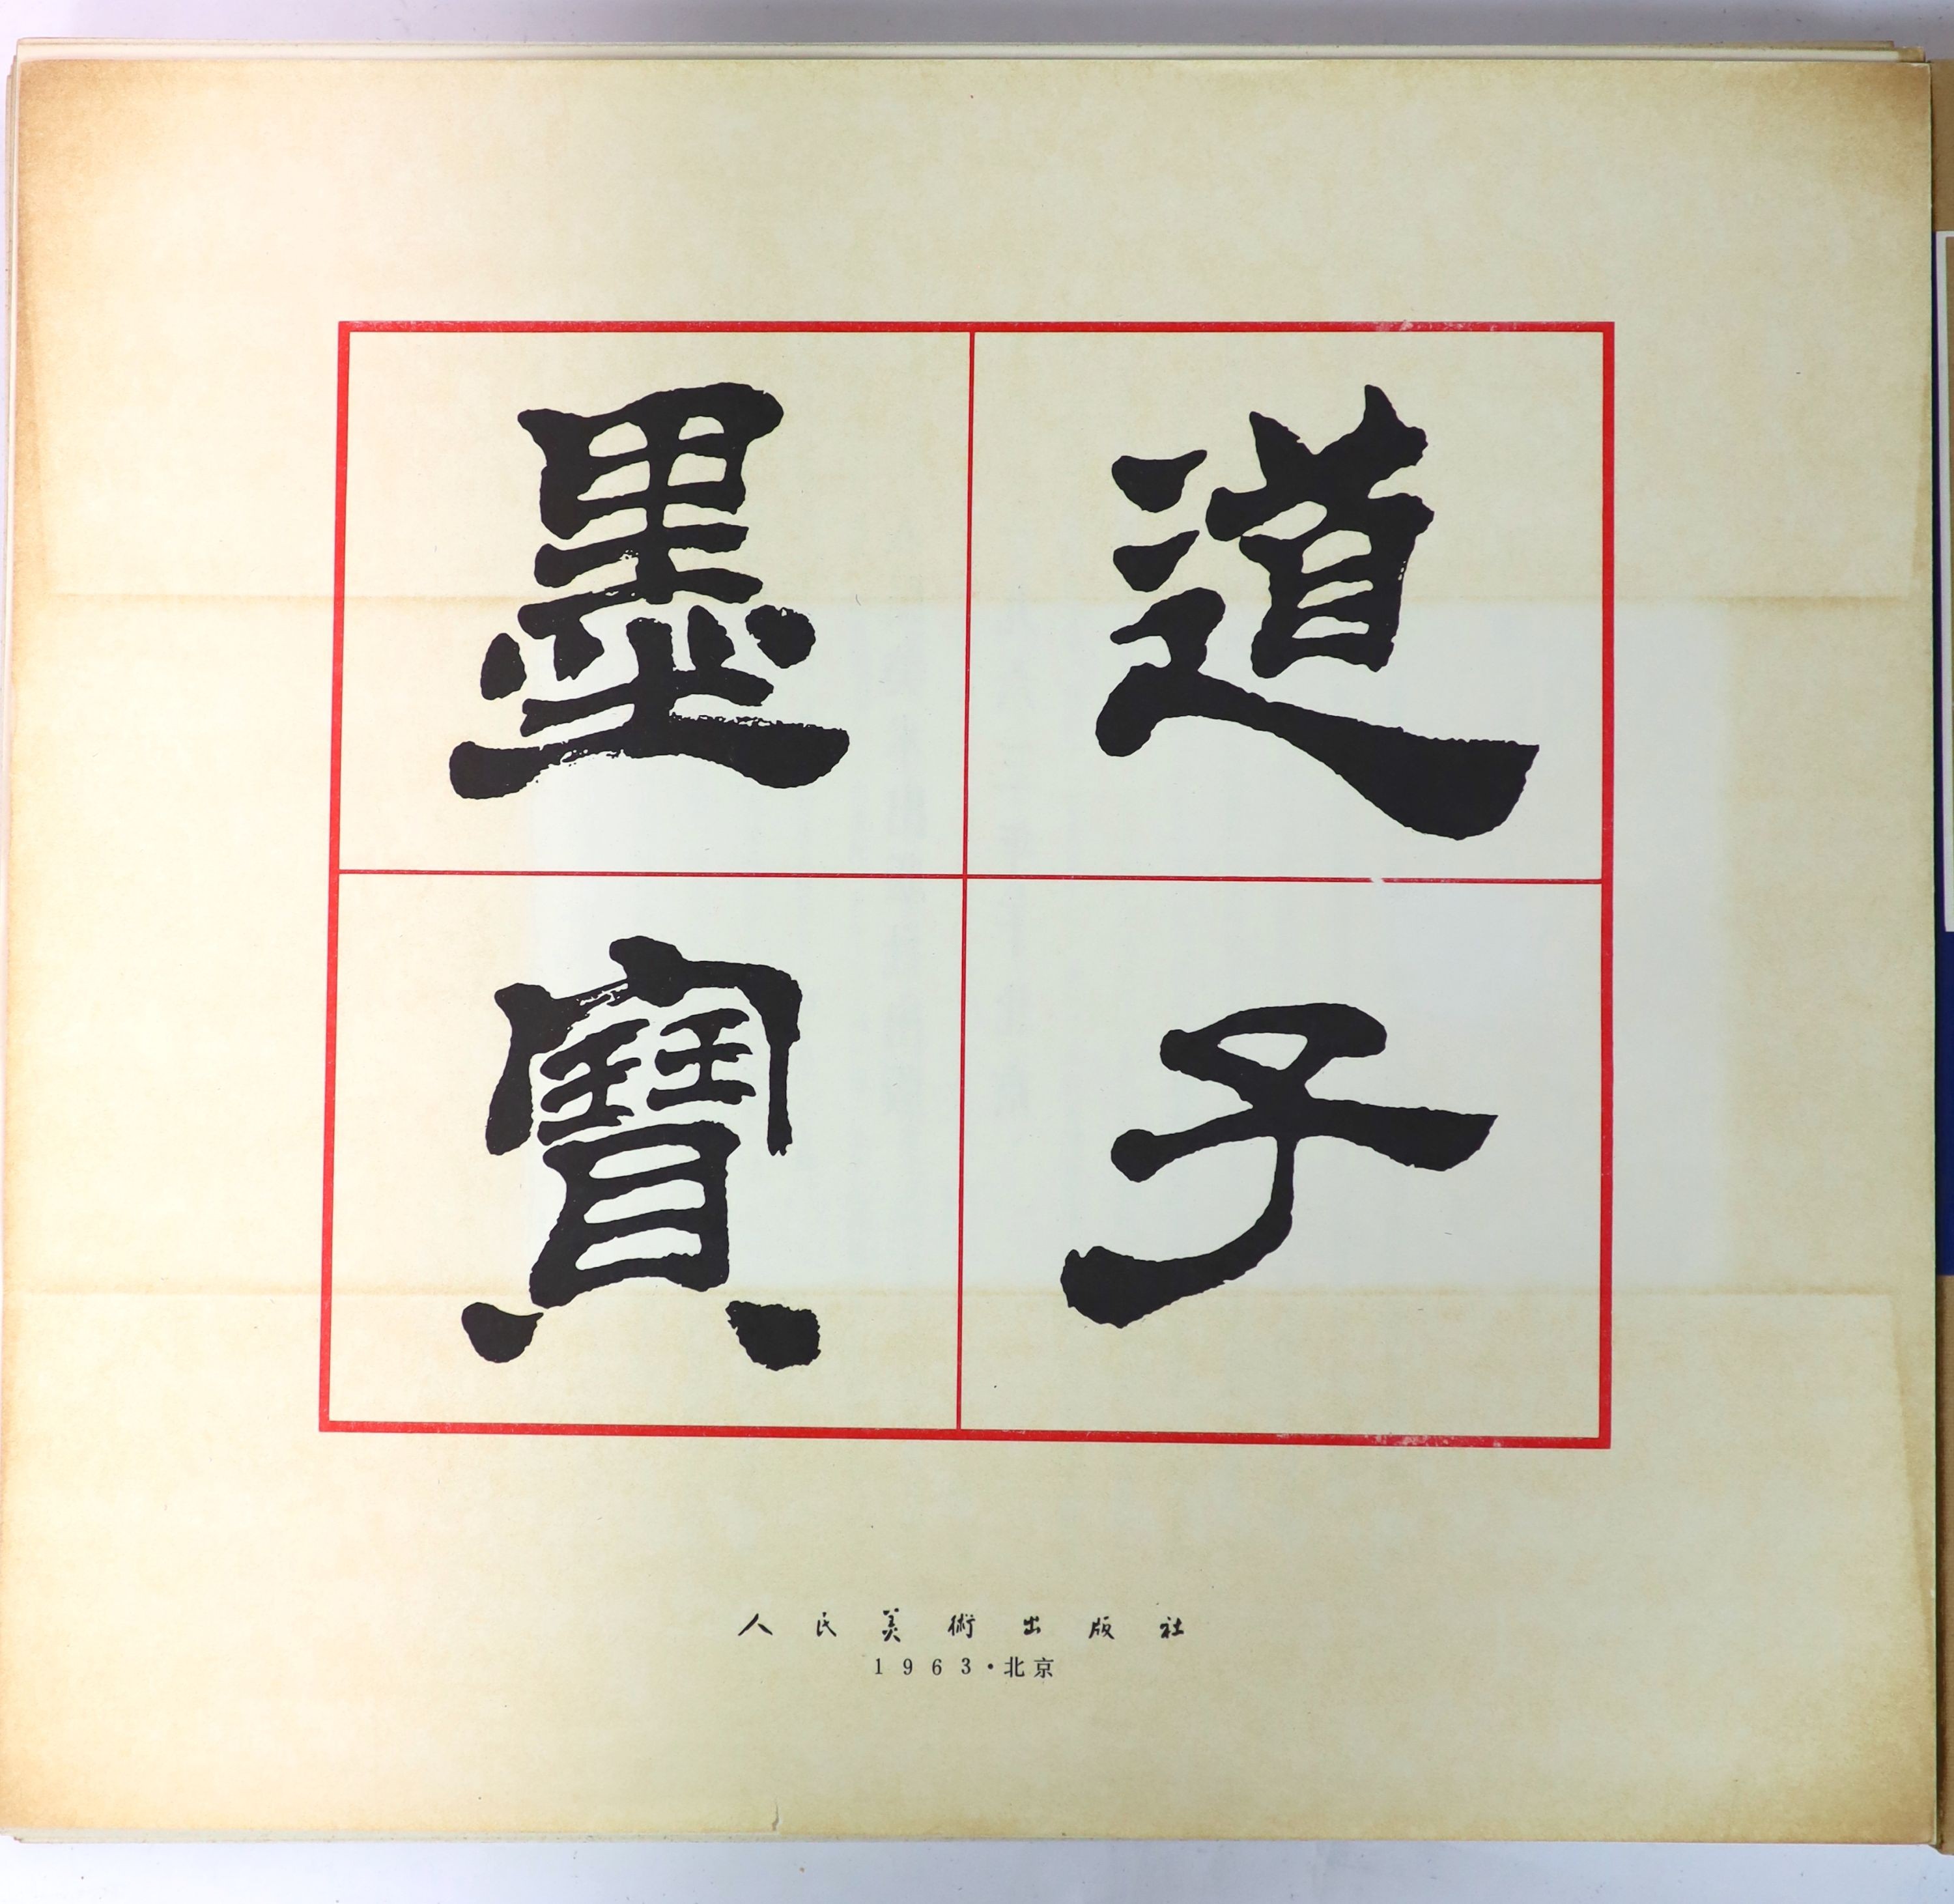 Three Chinese albums or books of prints and paintings, 37.5 x 33.5 cm